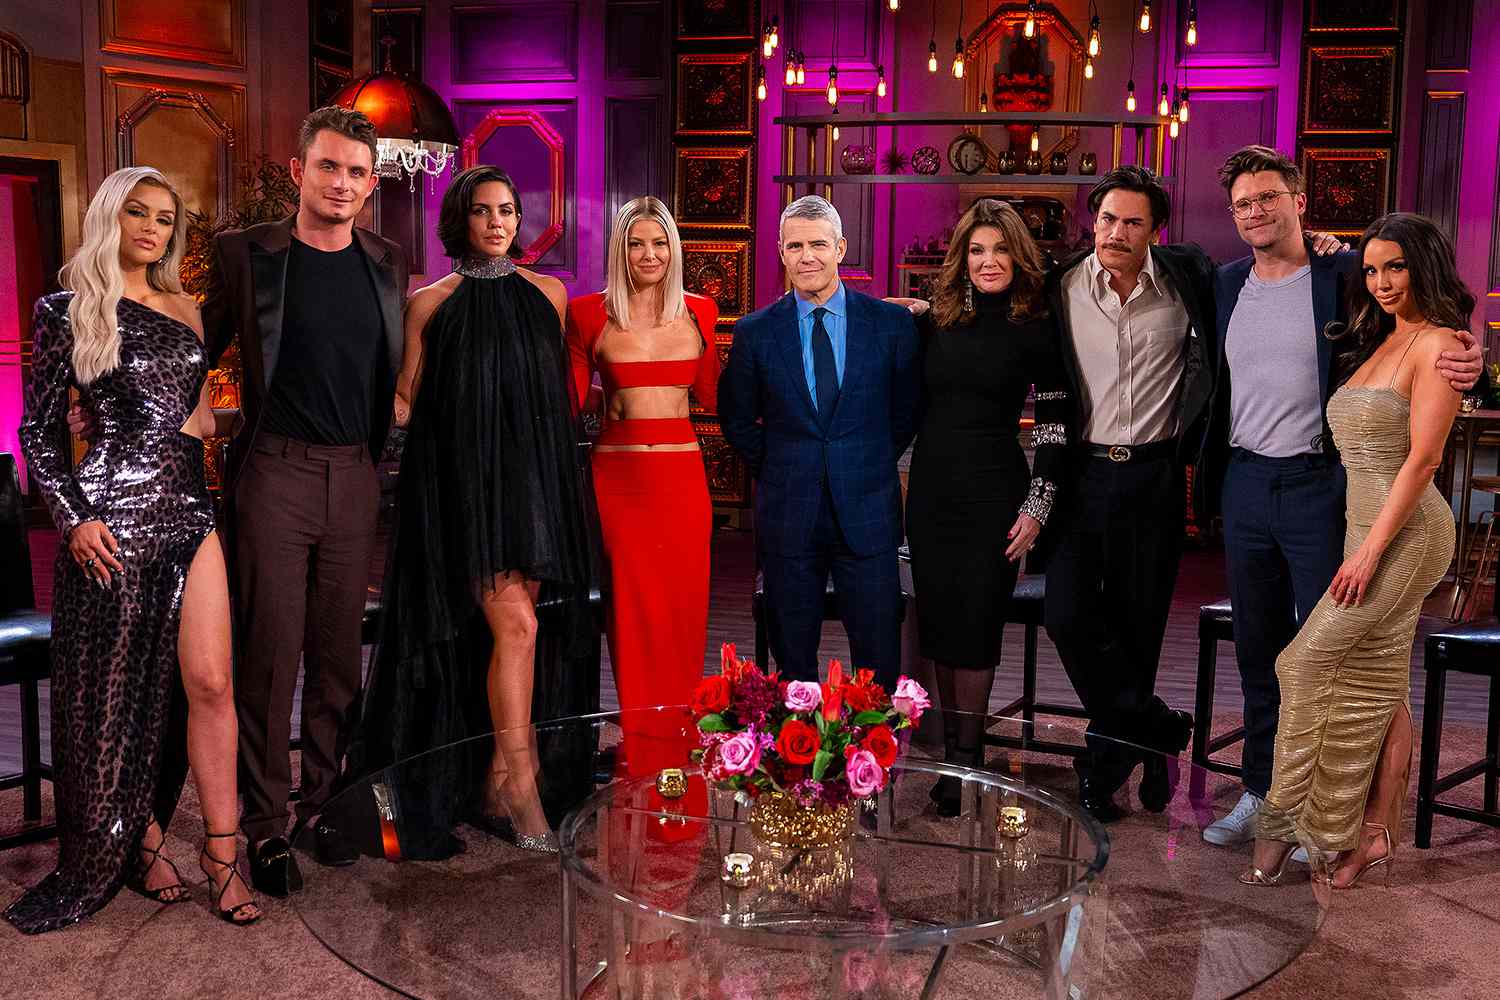 Vanderpump Rules Season 11 Reunion Highlights Emotional Conflicts and Uncertain Future